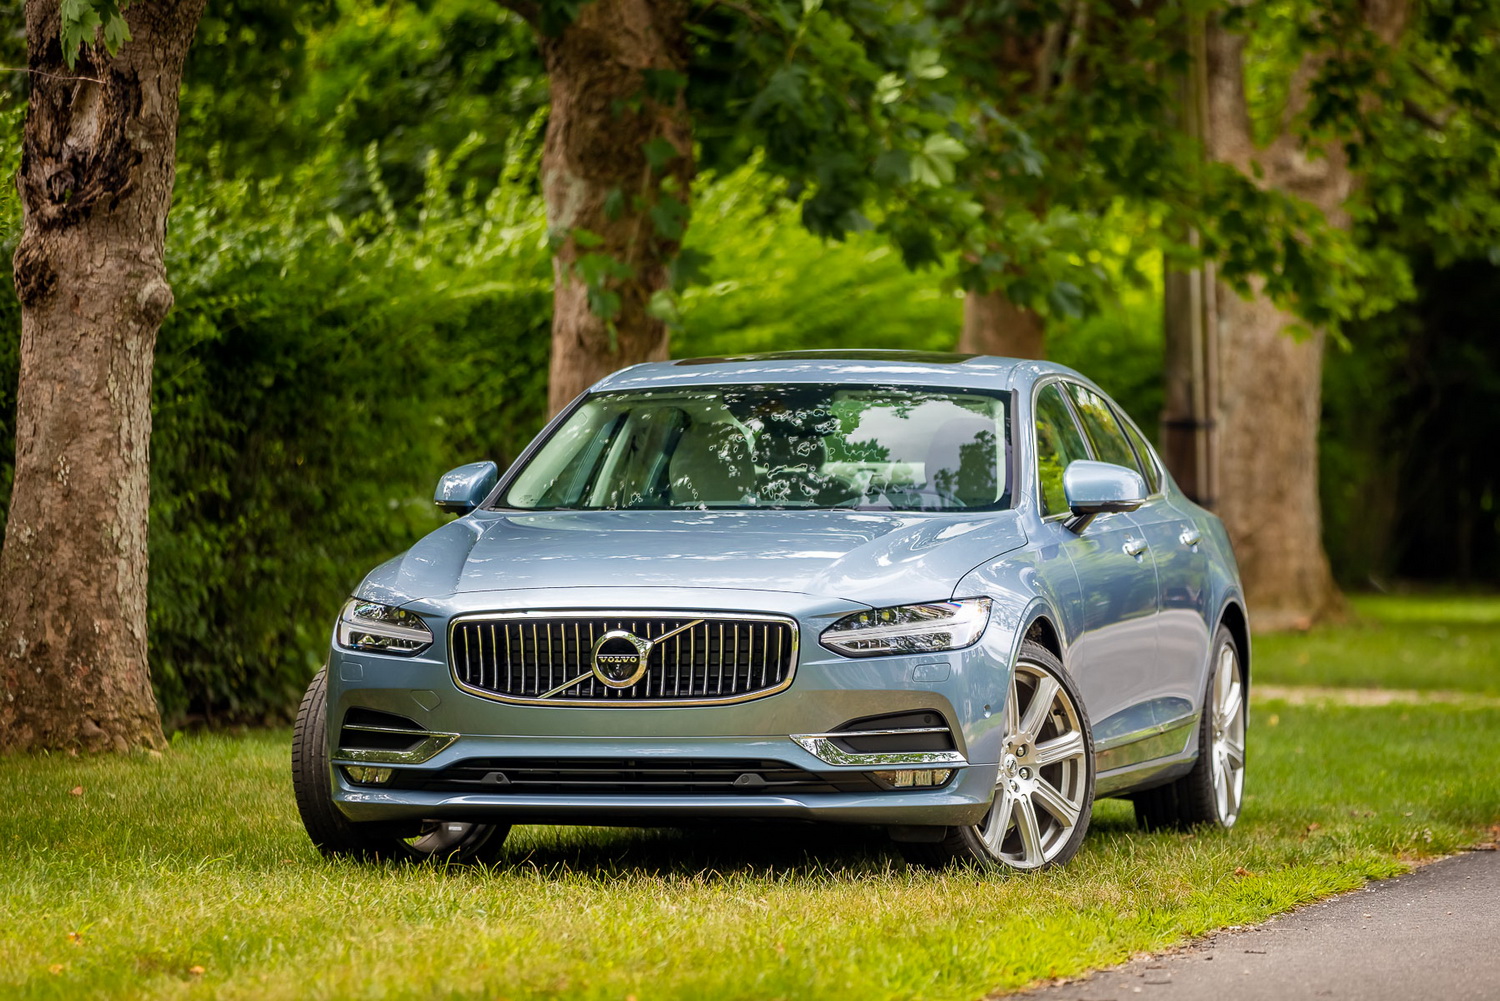 2017 Volvo S90 T6 Review | Digital Trends